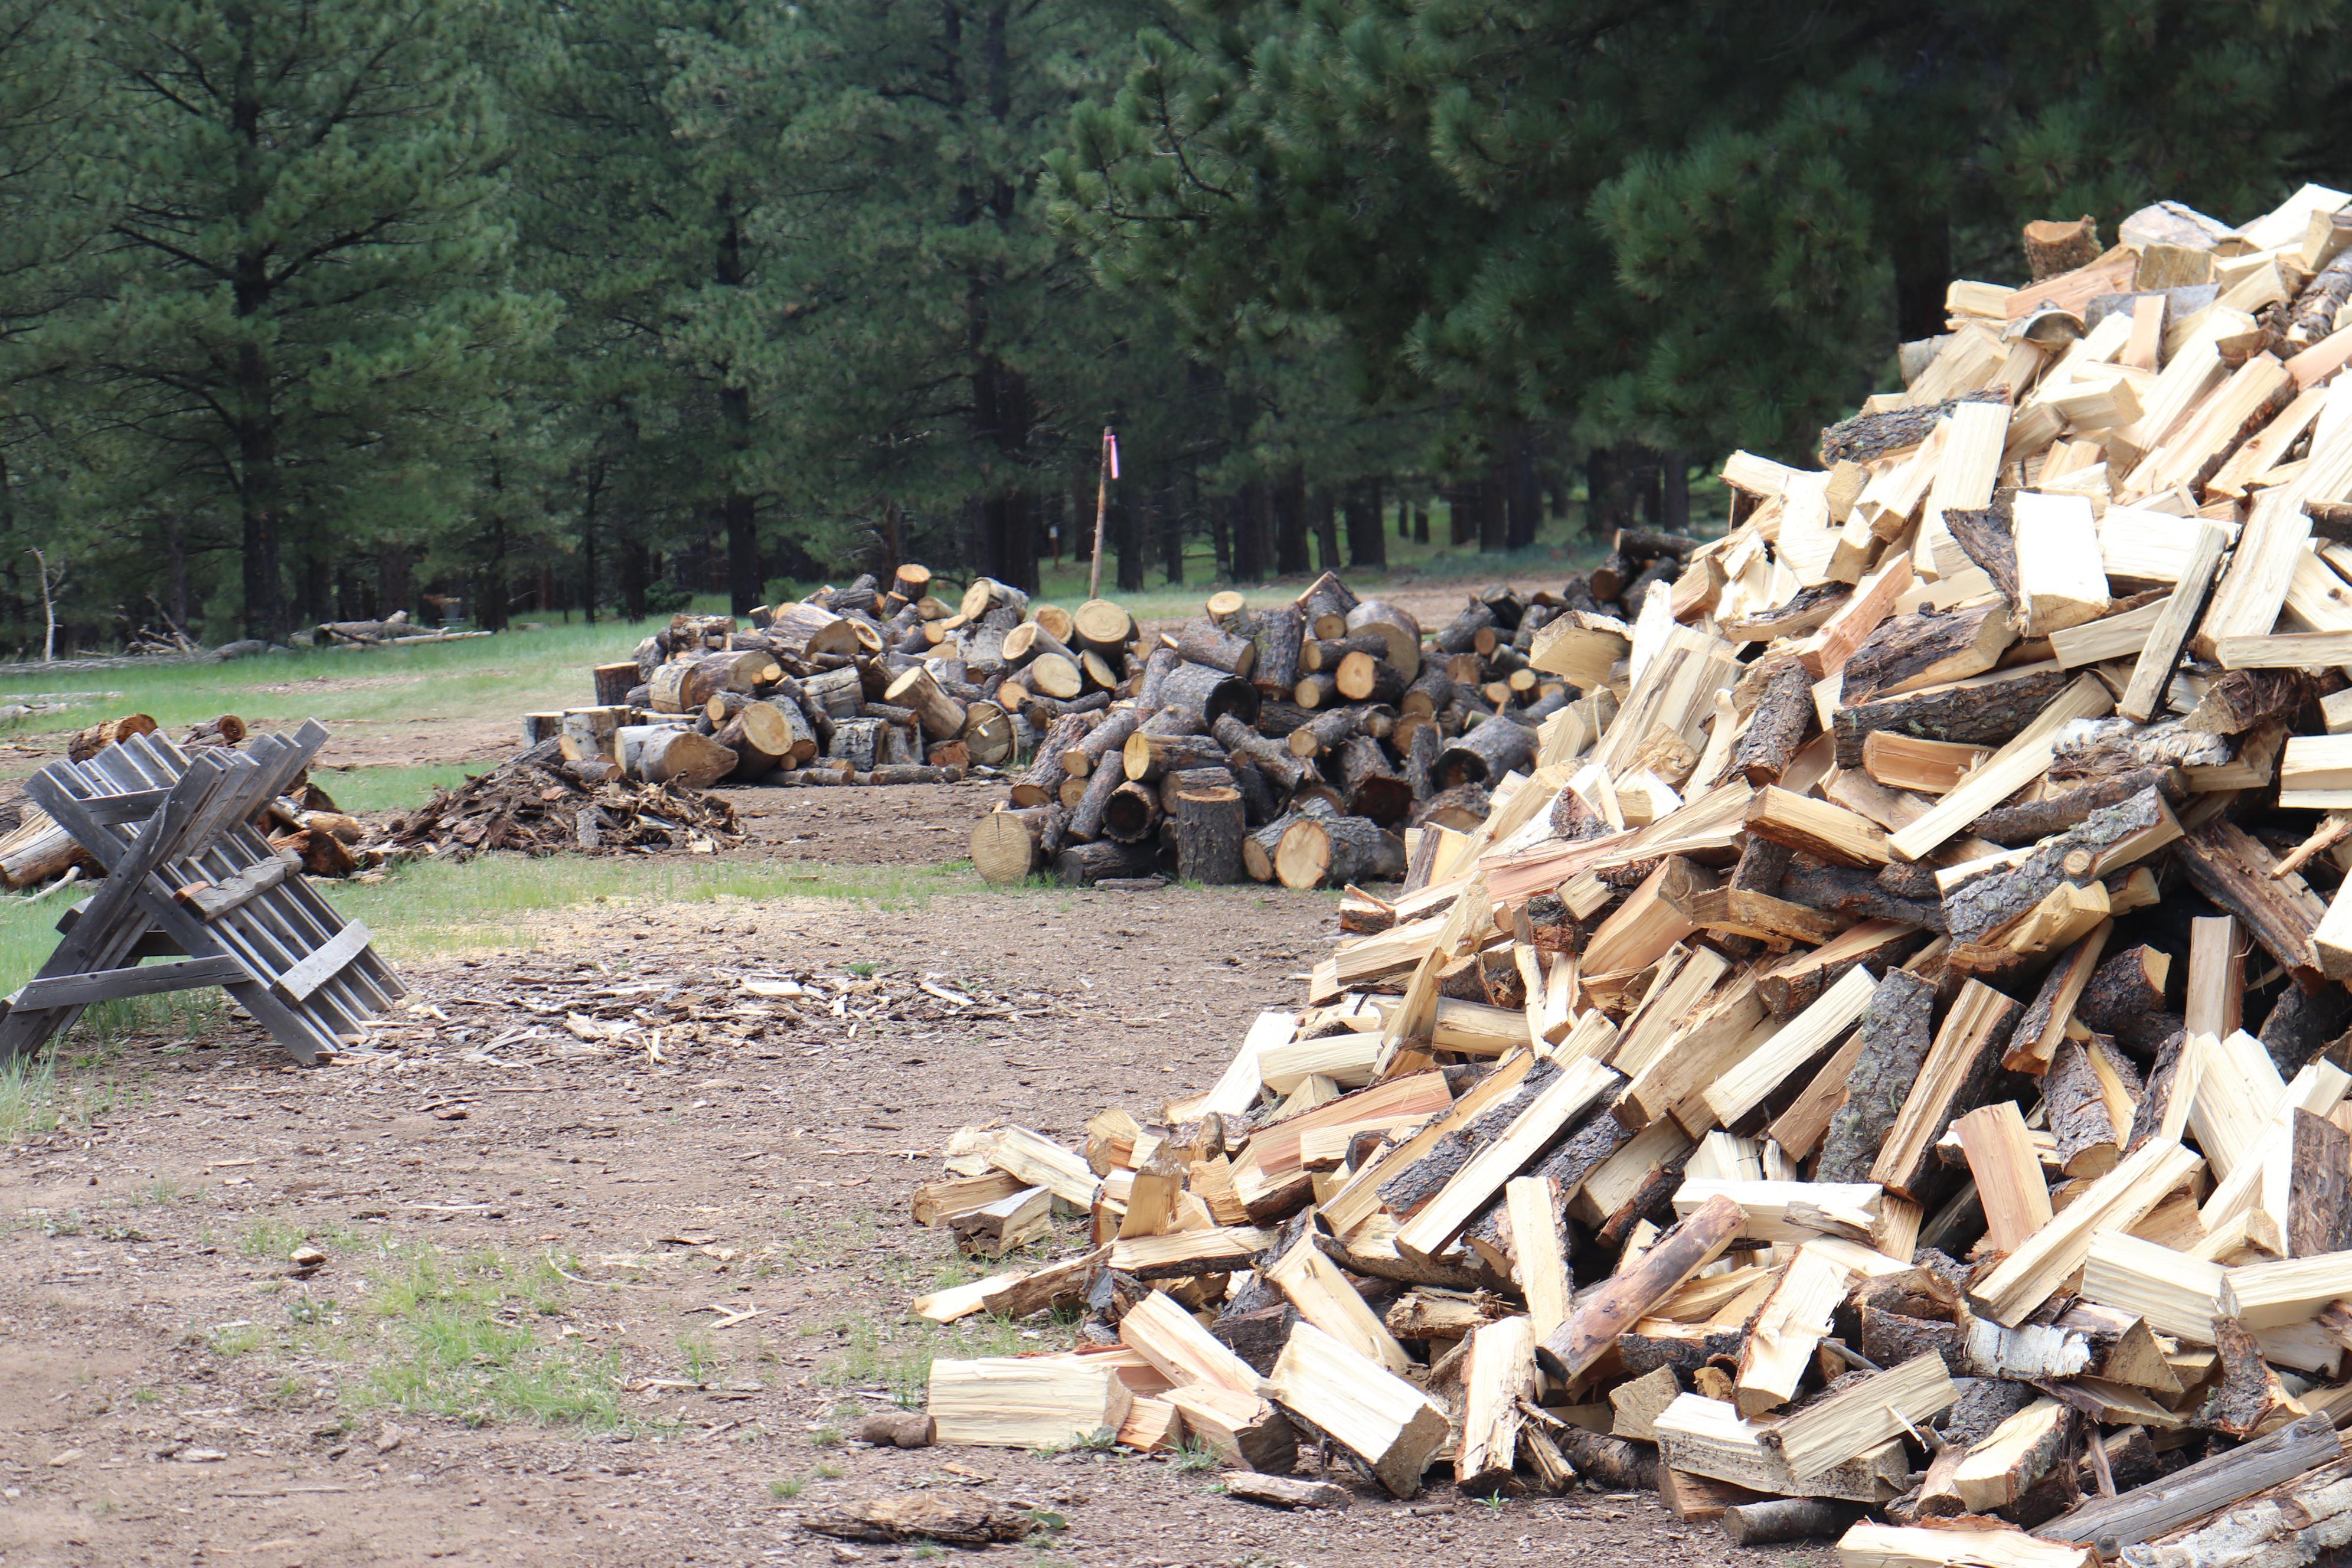 A pile of cut and stacked wood among piles of wood in various states of processing.